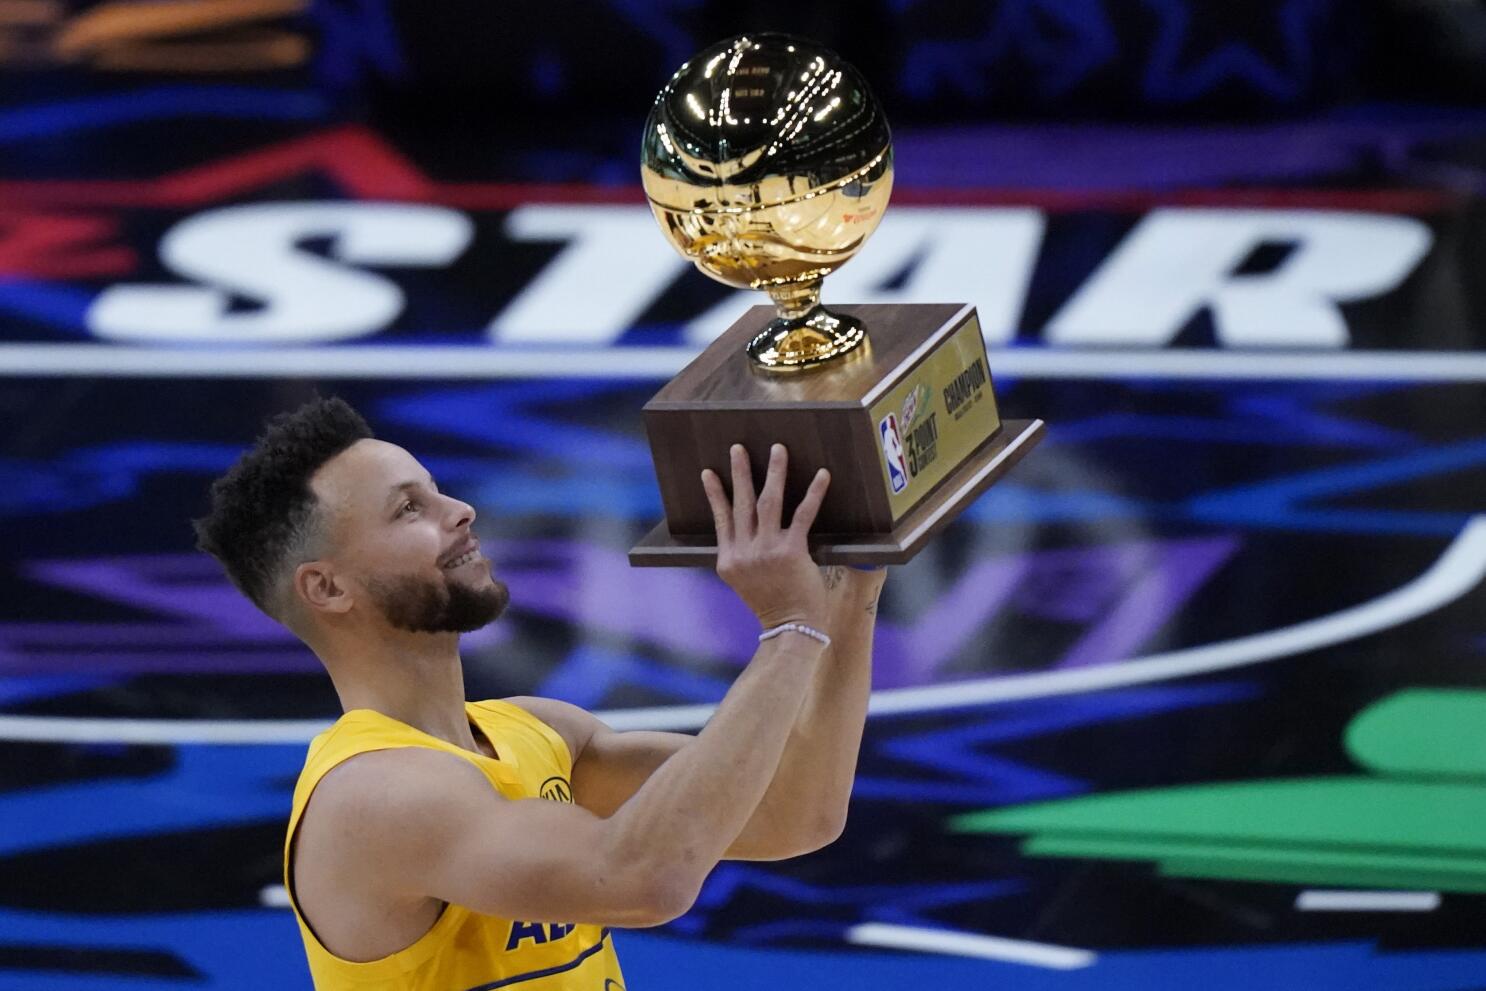 Curry has now captured all the awards that an NBA legend can